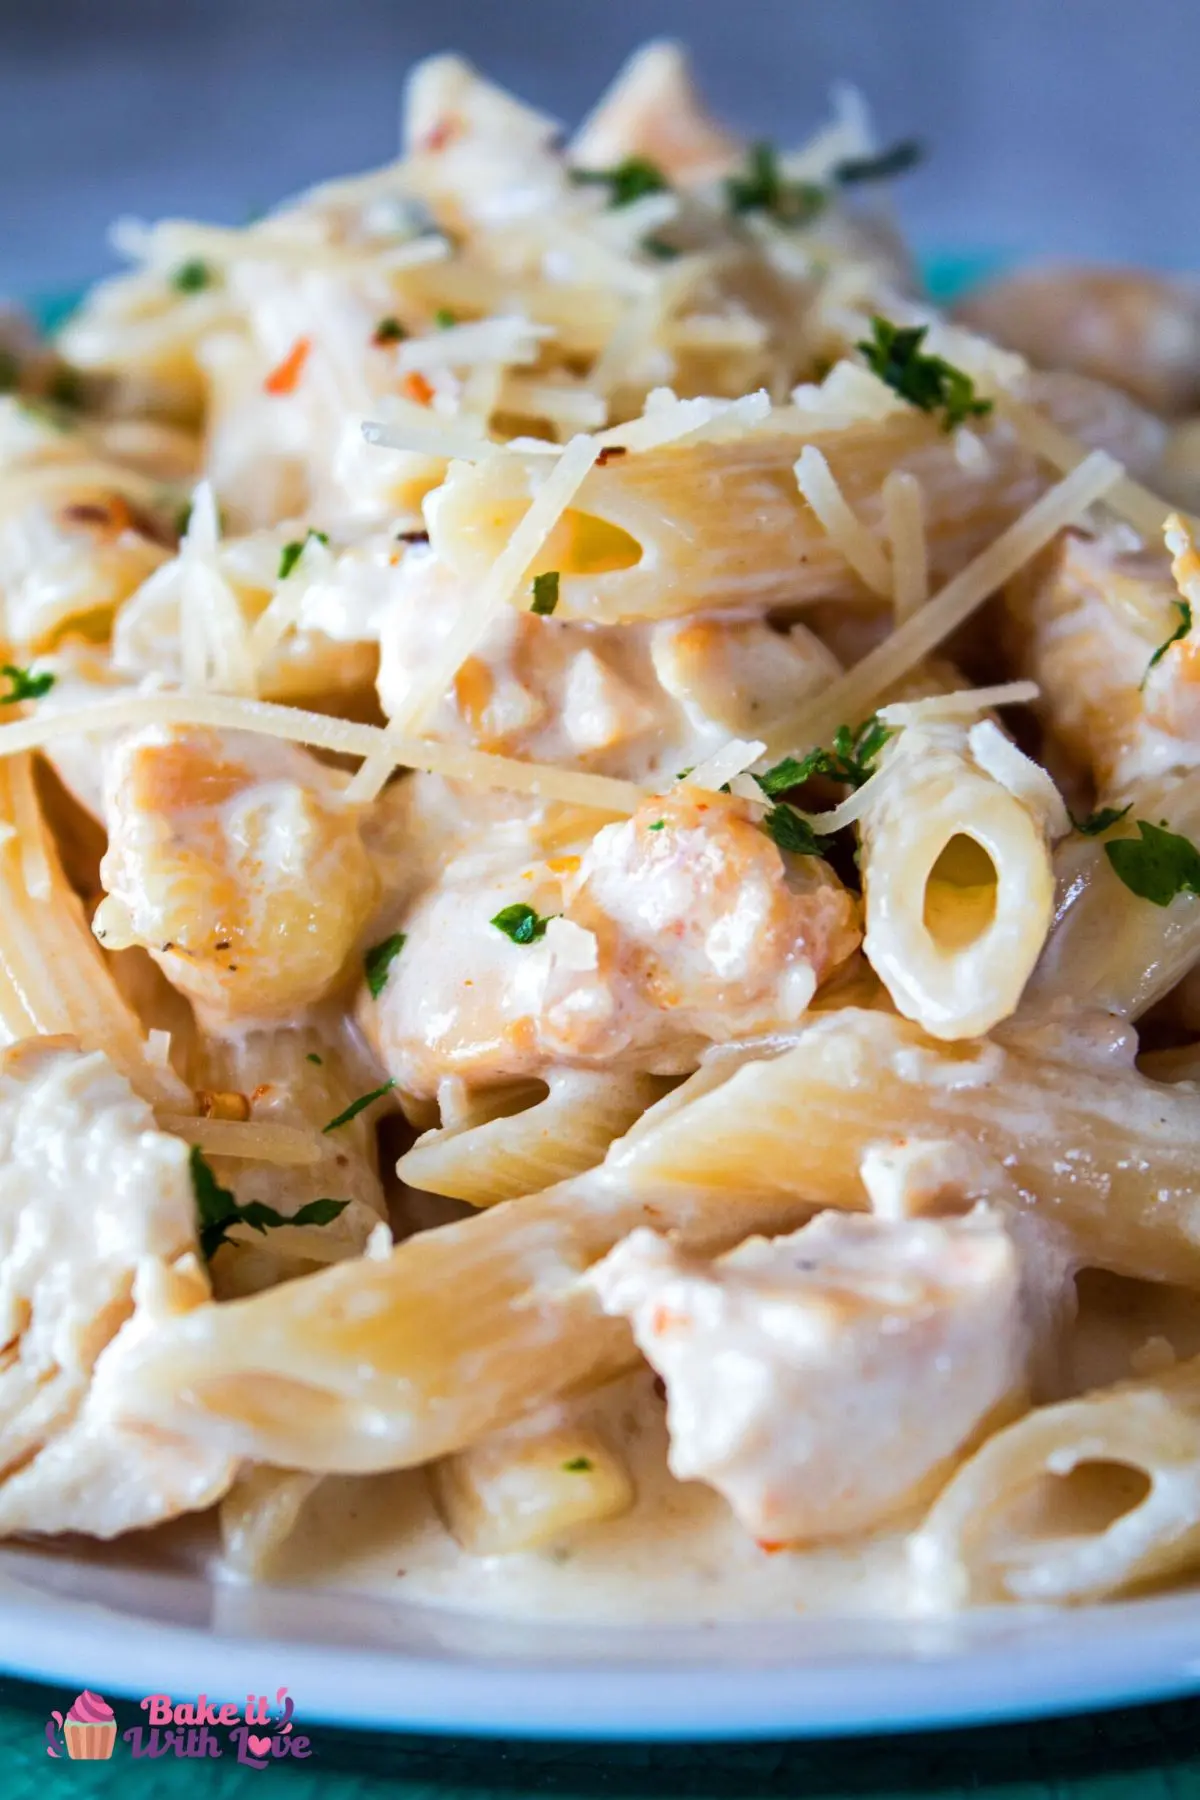 This Slow Cooker Chicken Alfredo Crock Pot Recipe is a weekday dinner idea that the whole family will love